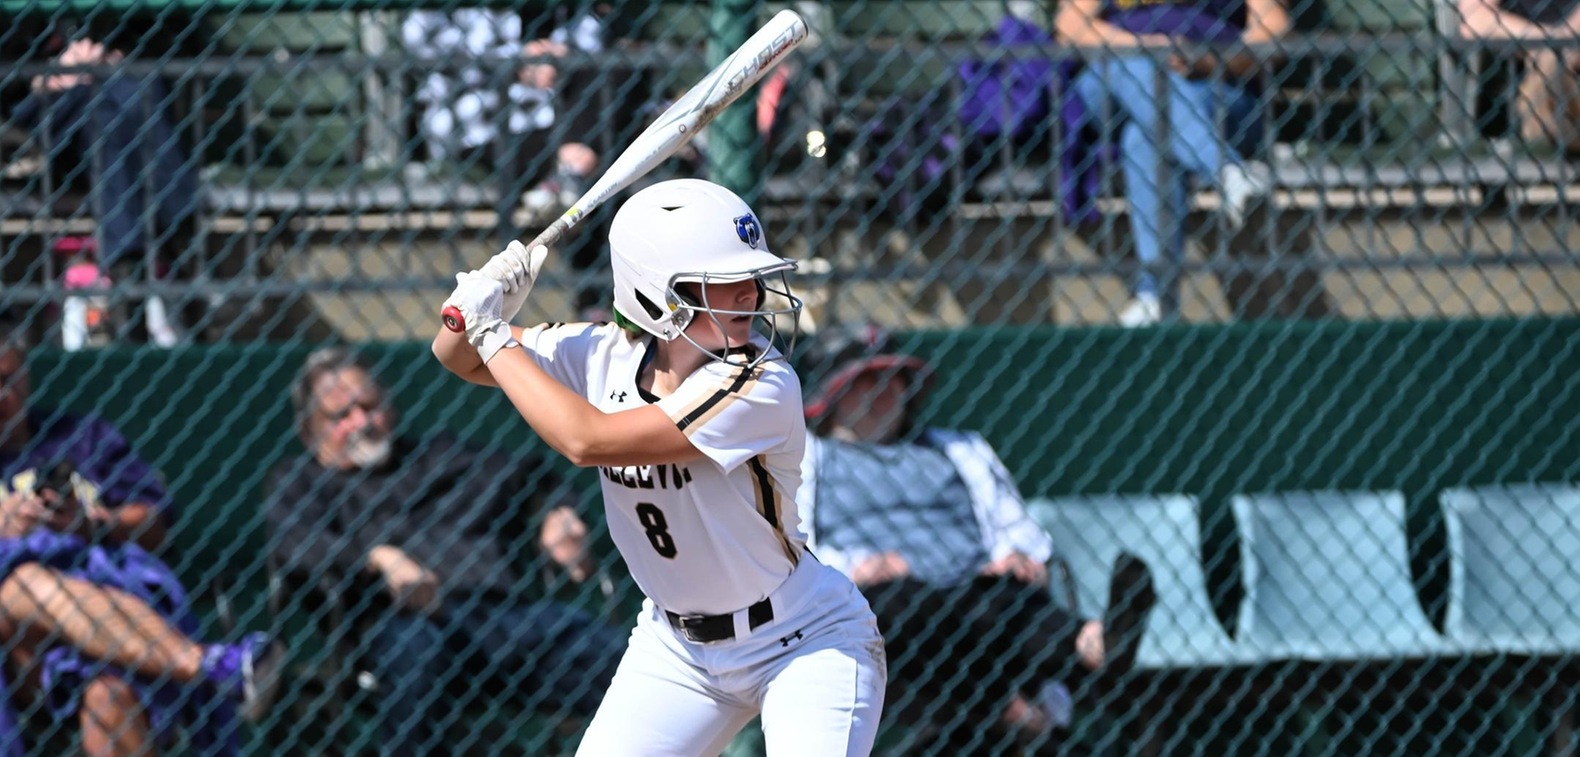 Sami Reding's walk-off RBI infield single in the nightcap secured the doubleheader sweep for the Bruins.